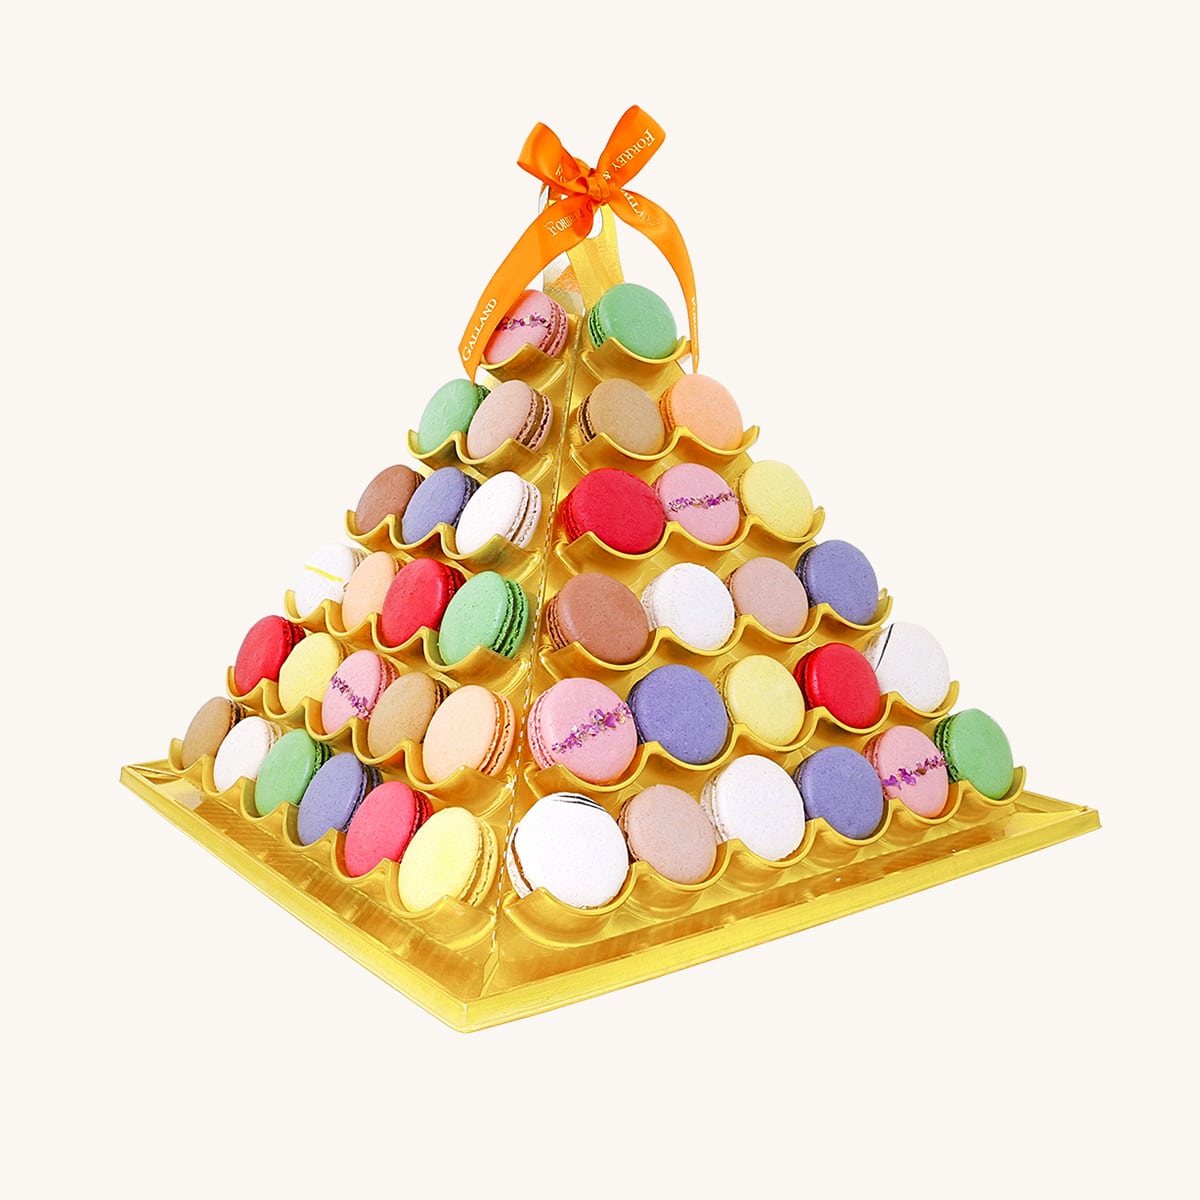 Forrey & Galland elegant pyramid display filled with 84 pieces of handmade premium macarons